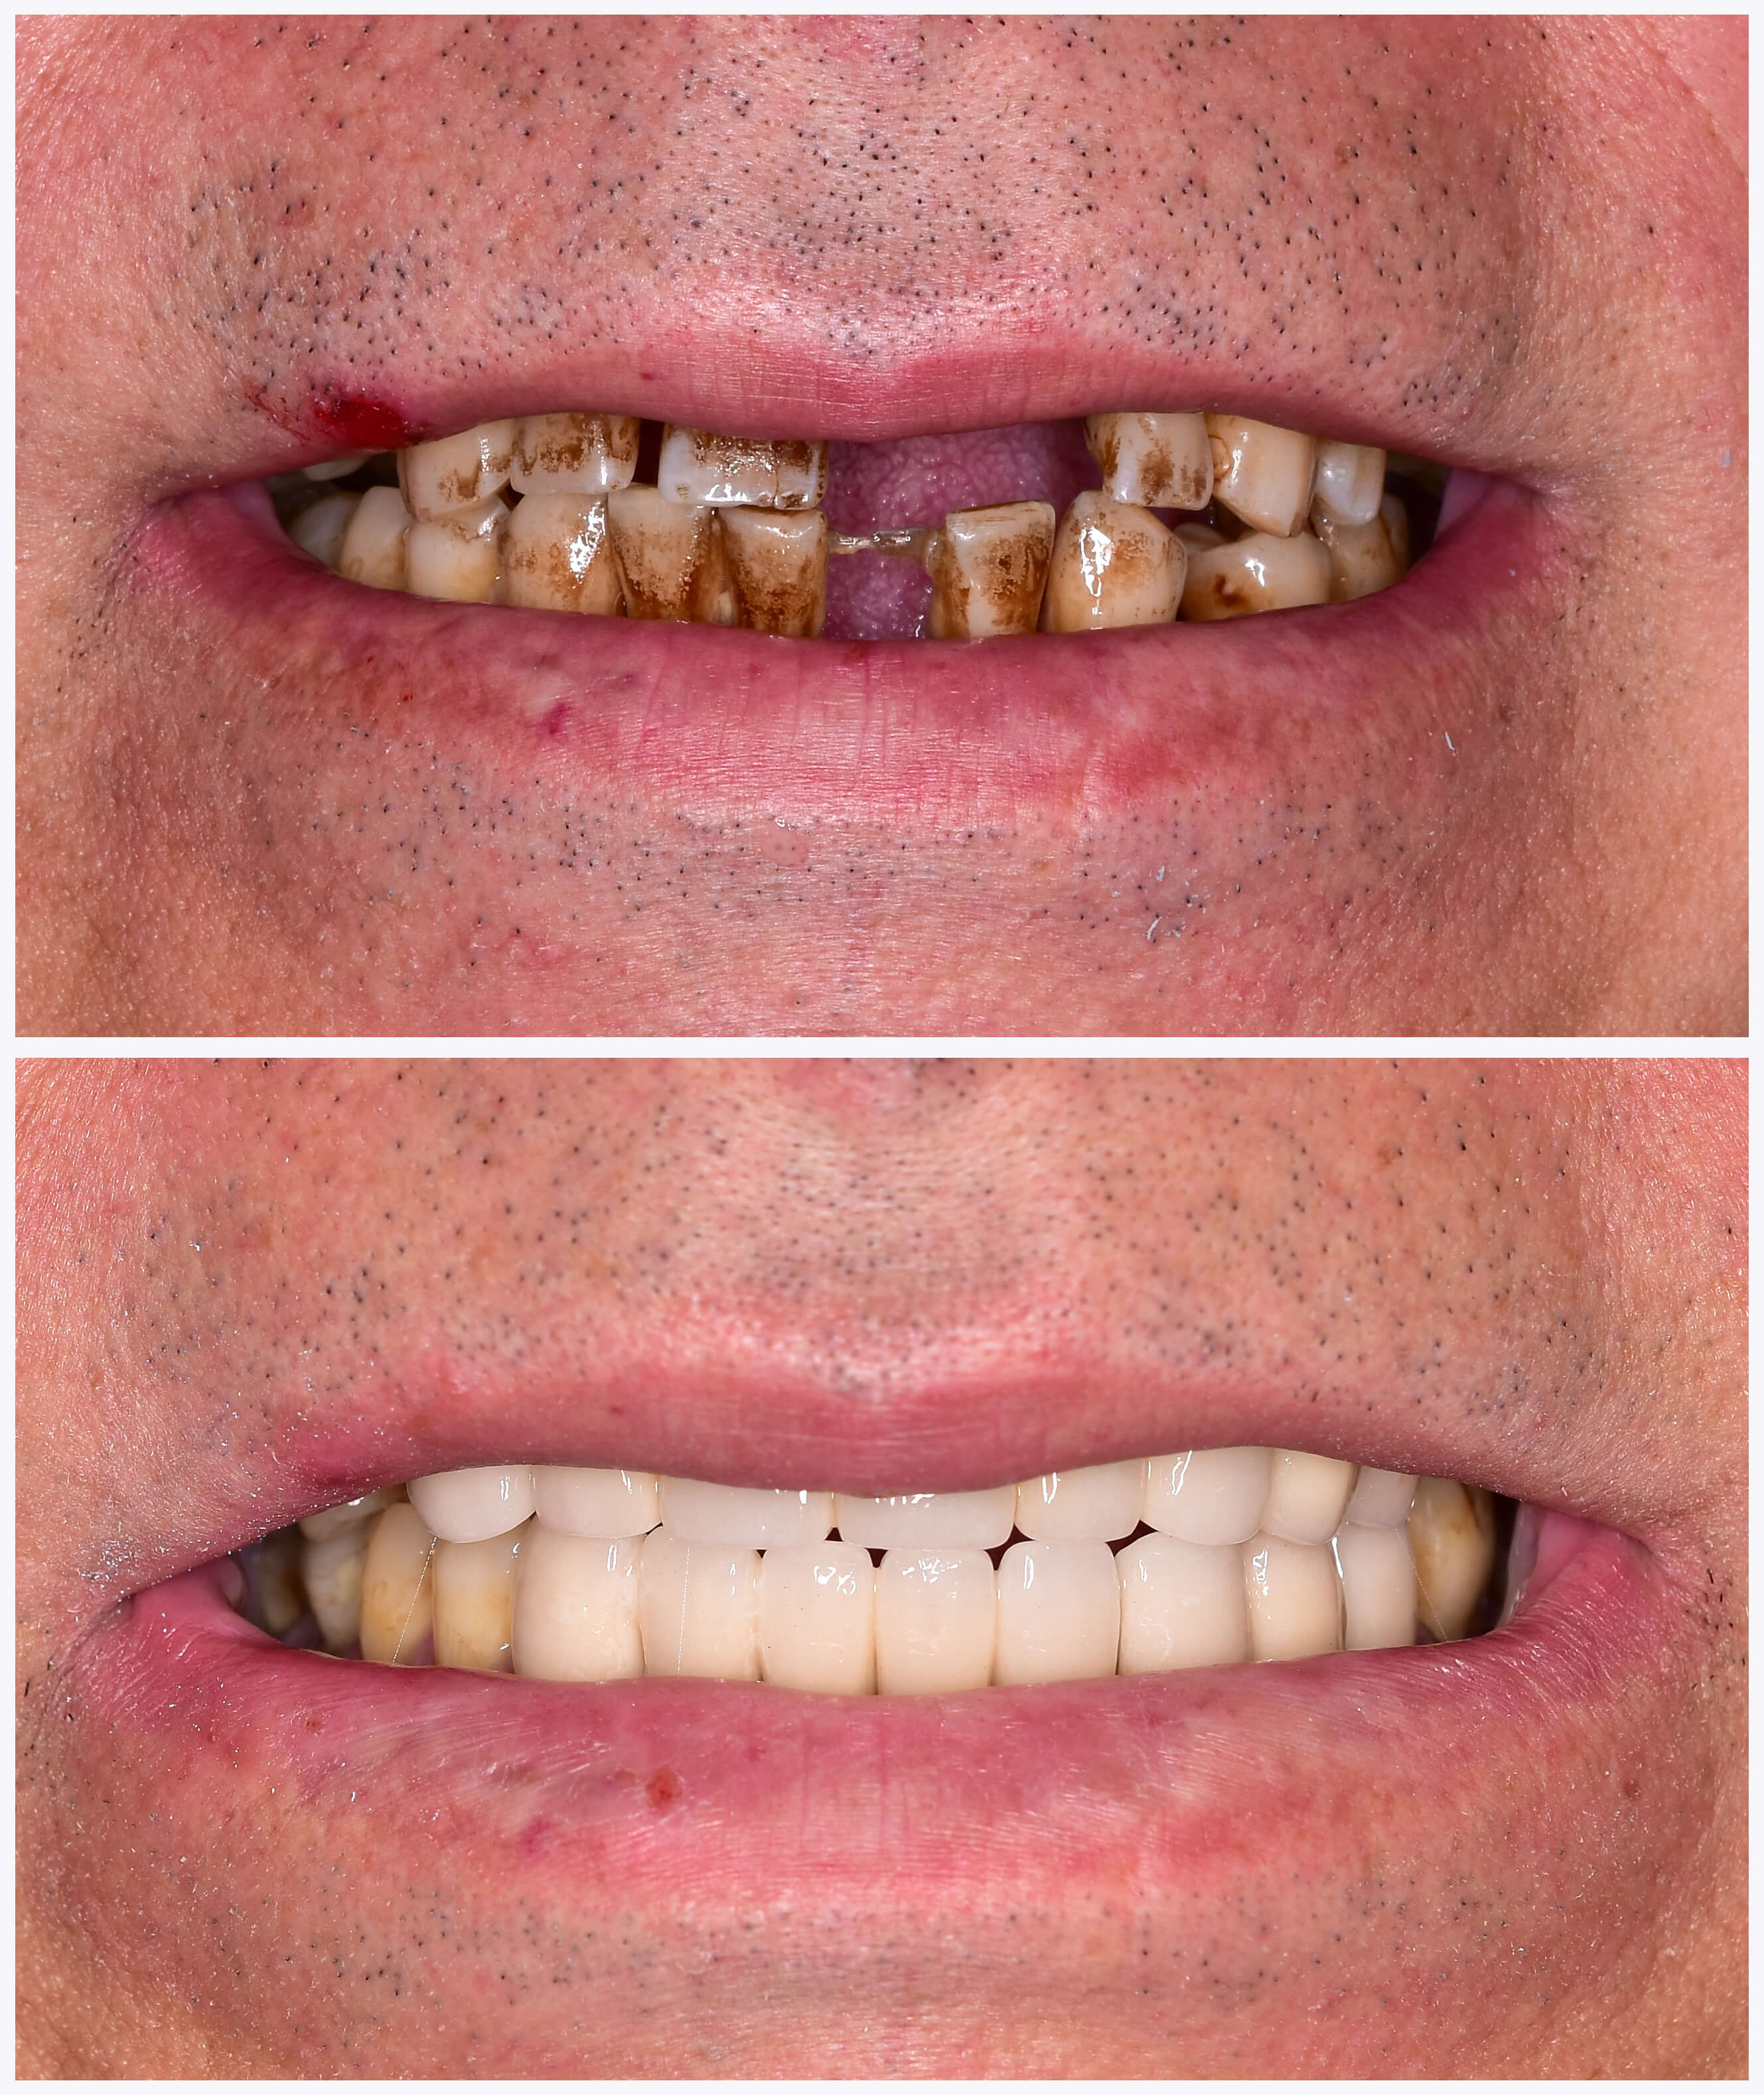 Implant treatment fo missing teeth and brighter smile. Before and after photo of a patien with a severely colored and damaged teeth.